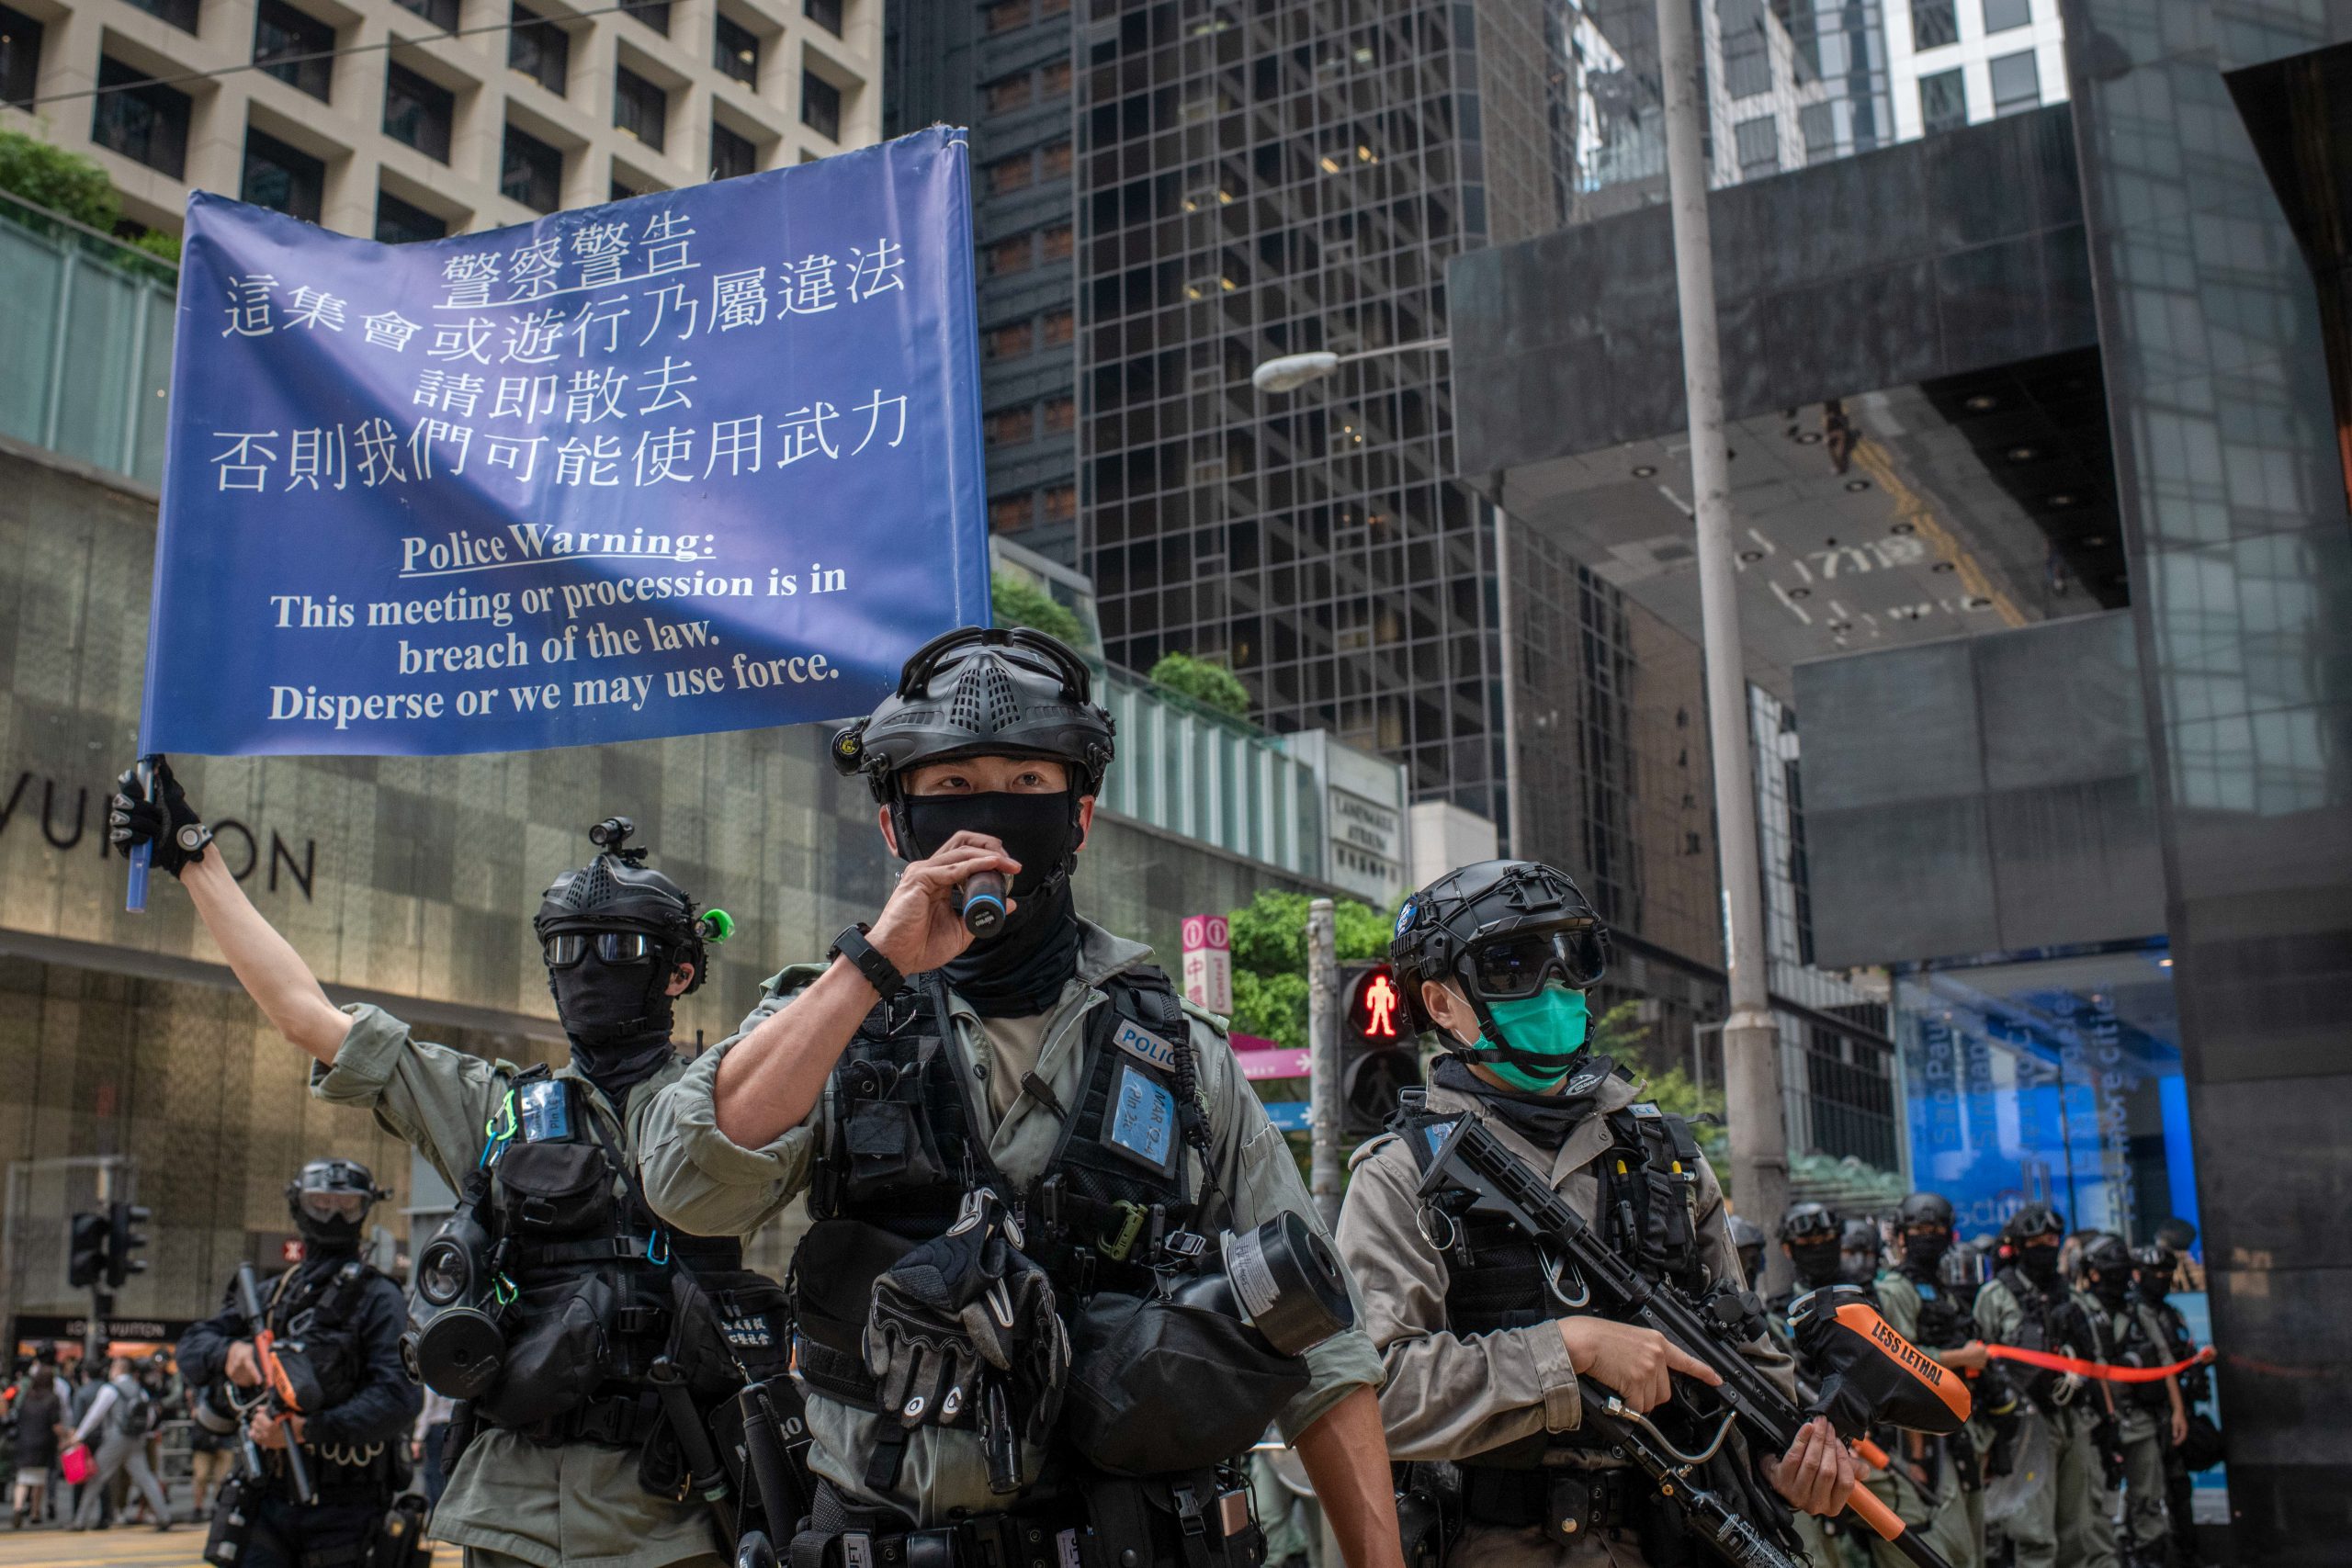 Protest against the national security law in Hong Kong, China